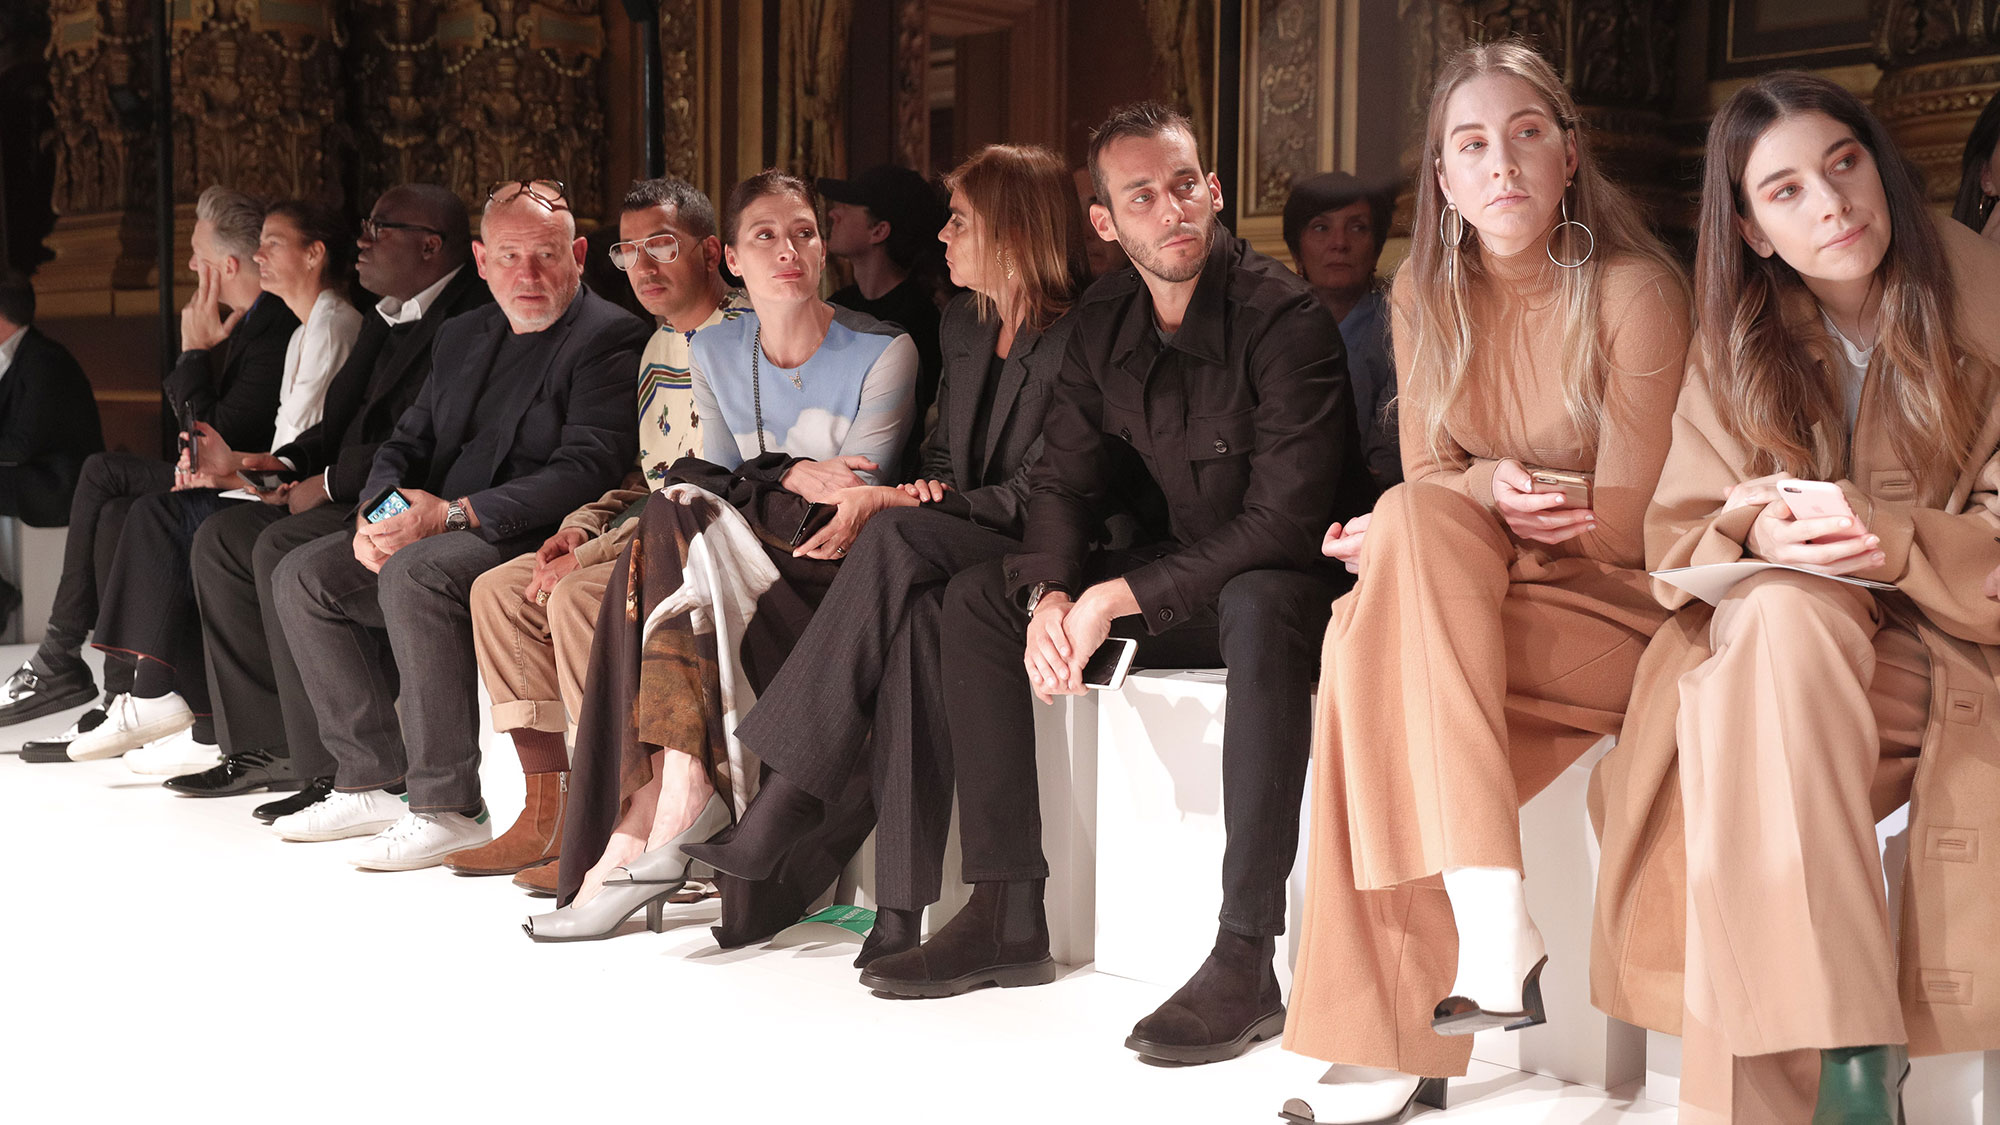 Paris fashion week: Trends from the front row